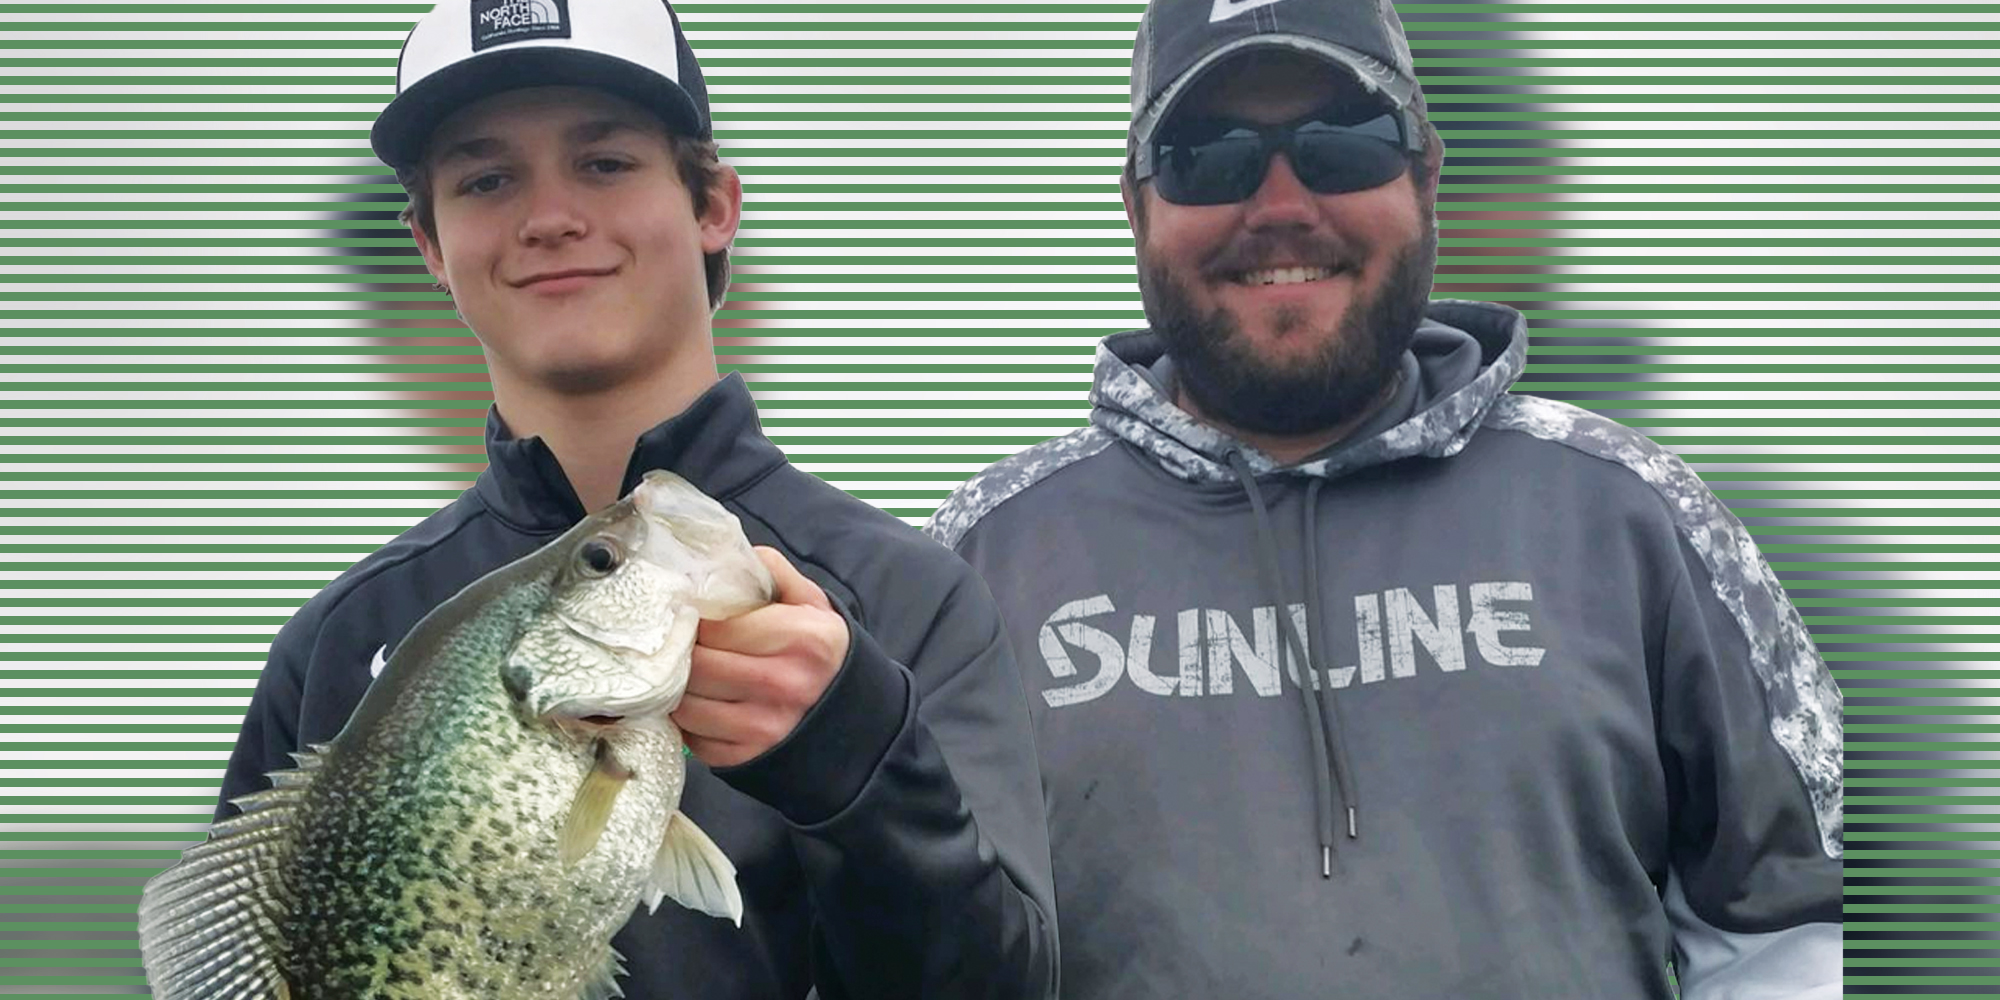 Guided Fishing in Texas  Bass, Crappie Fishing Trips West Texas